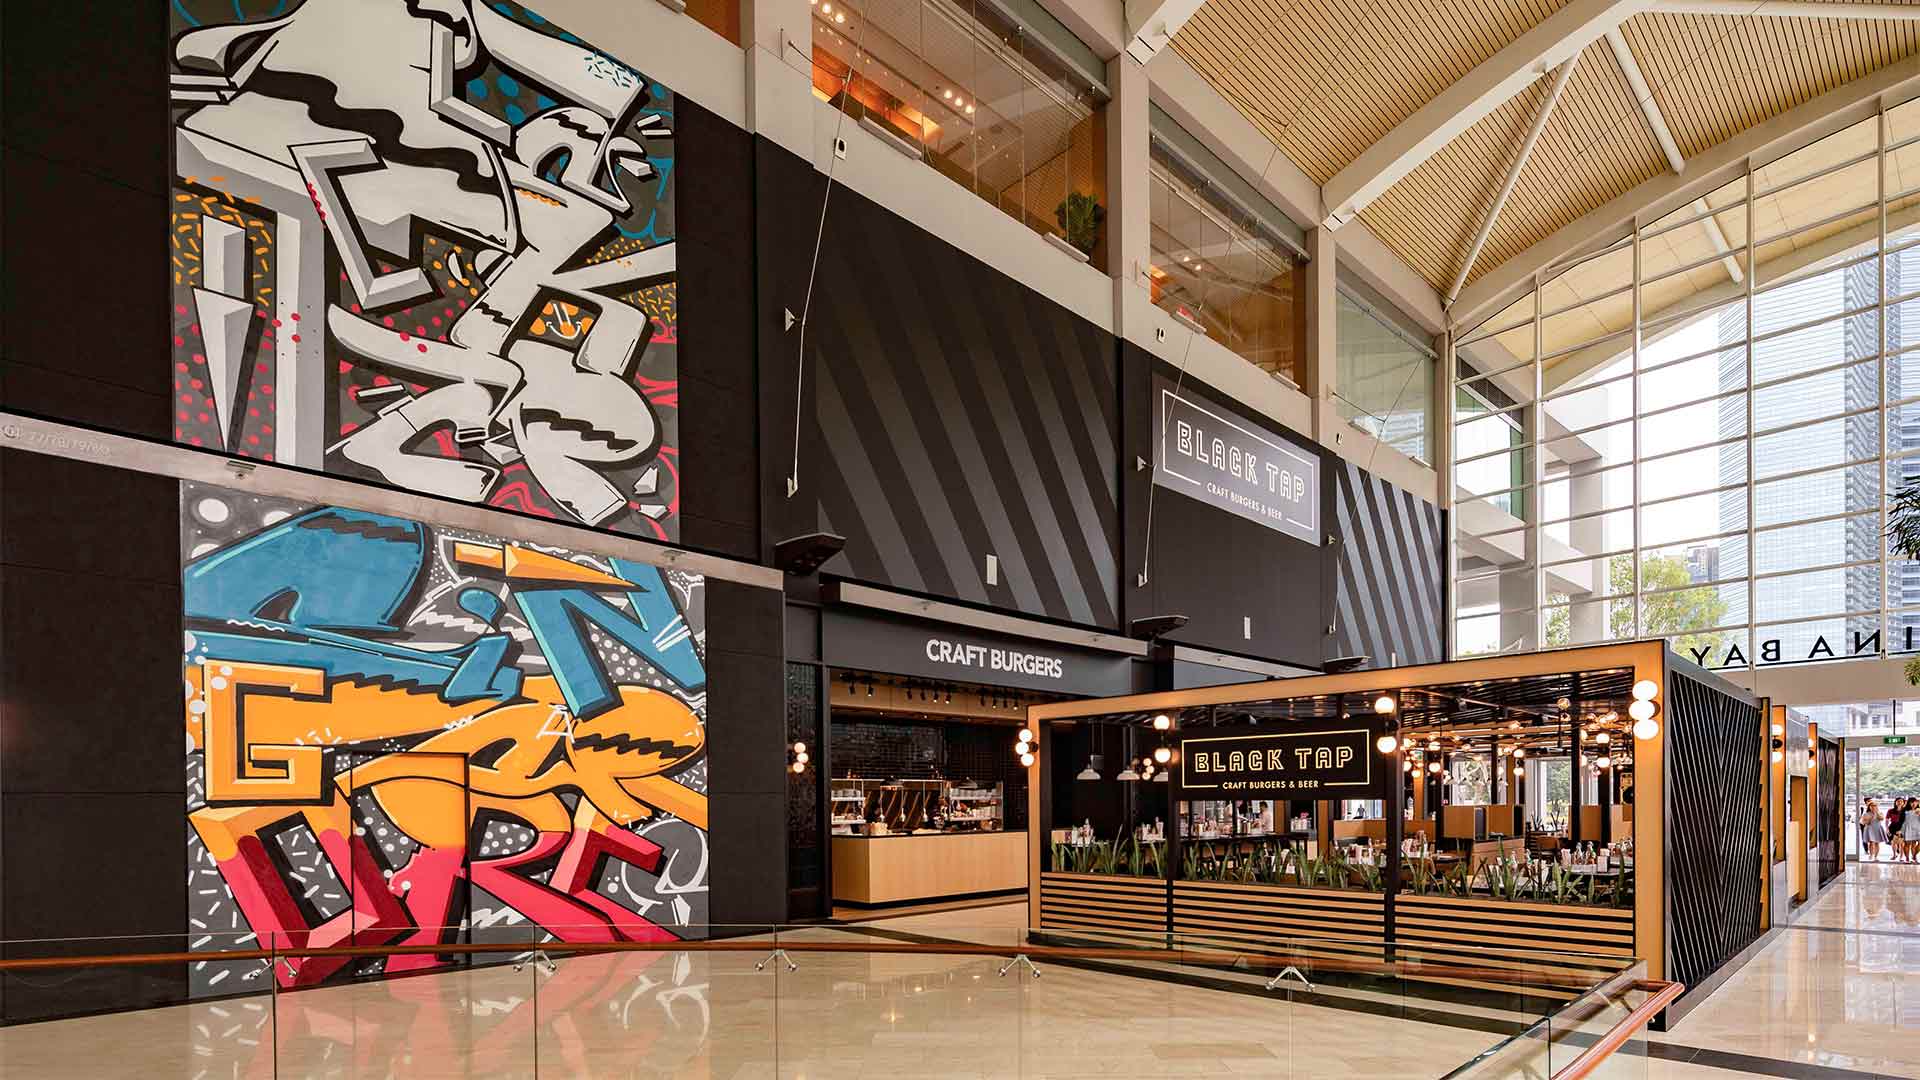 Storefront of Black Tap, a restaurant with private dining and events opportunities in Singapore